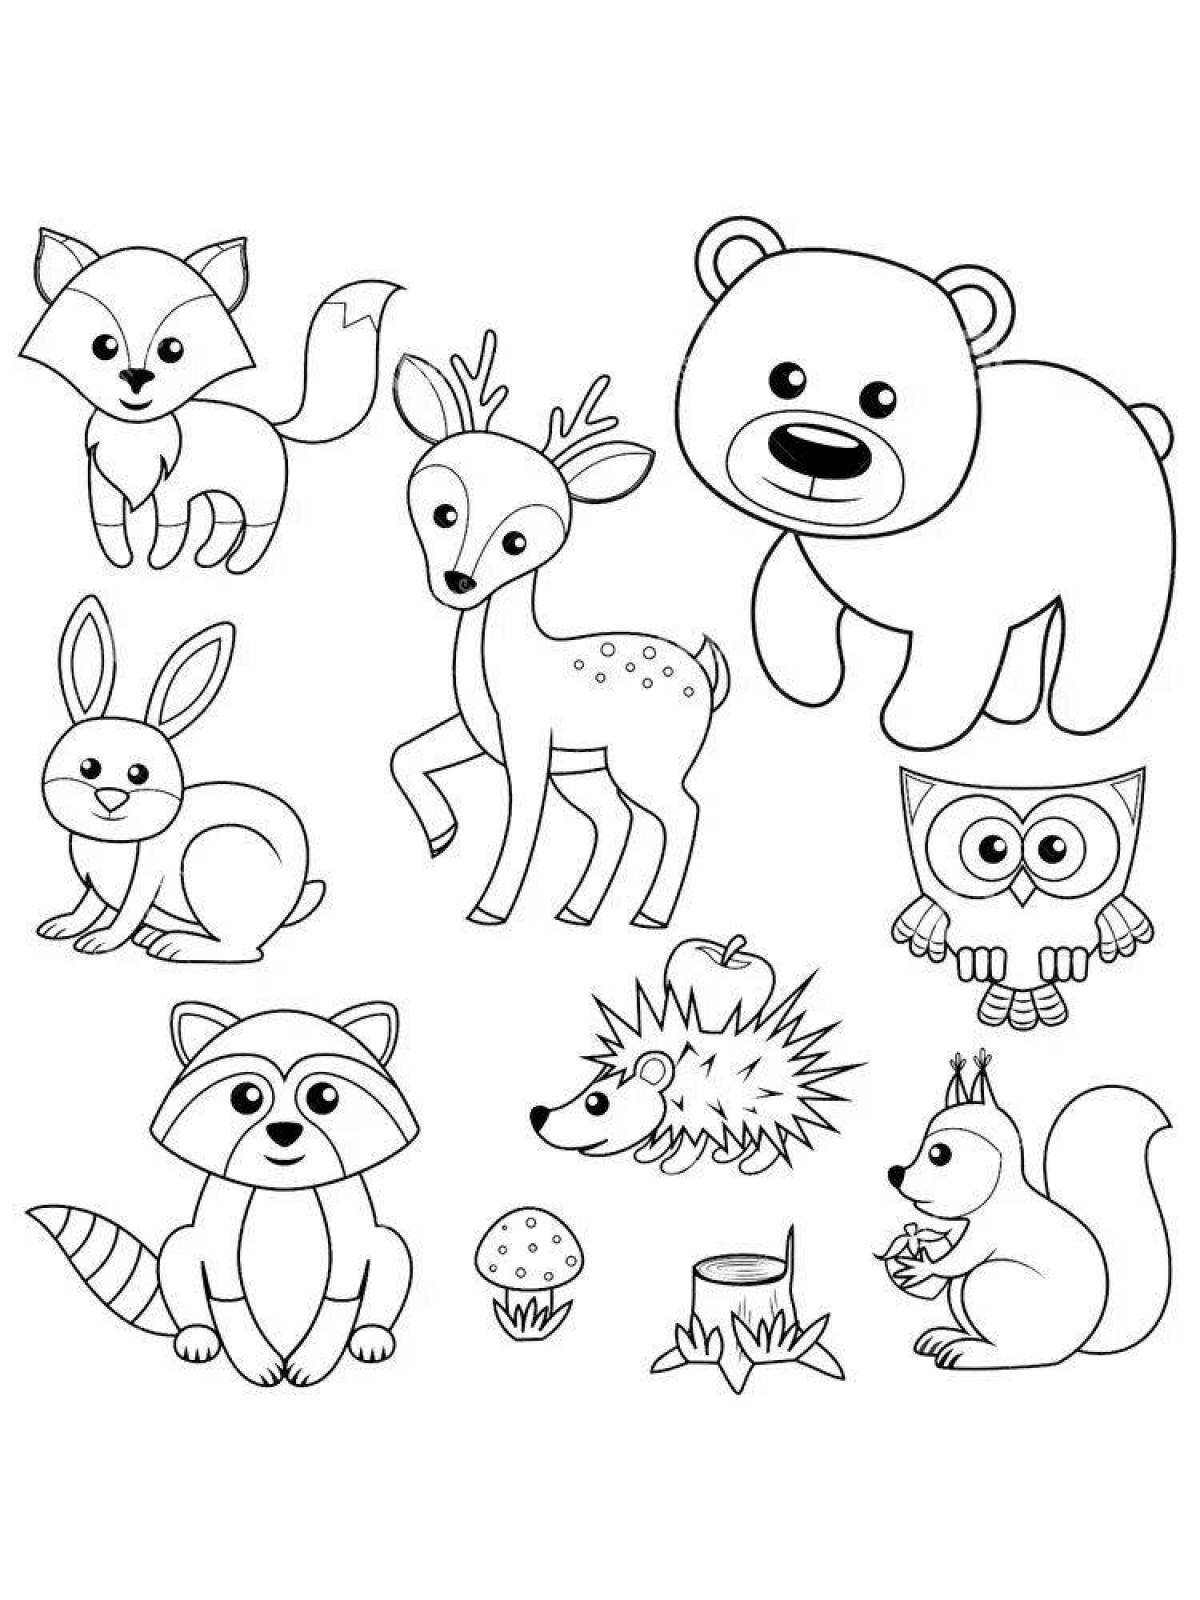 Exciting wild animal coloring book for 5-6 year olds